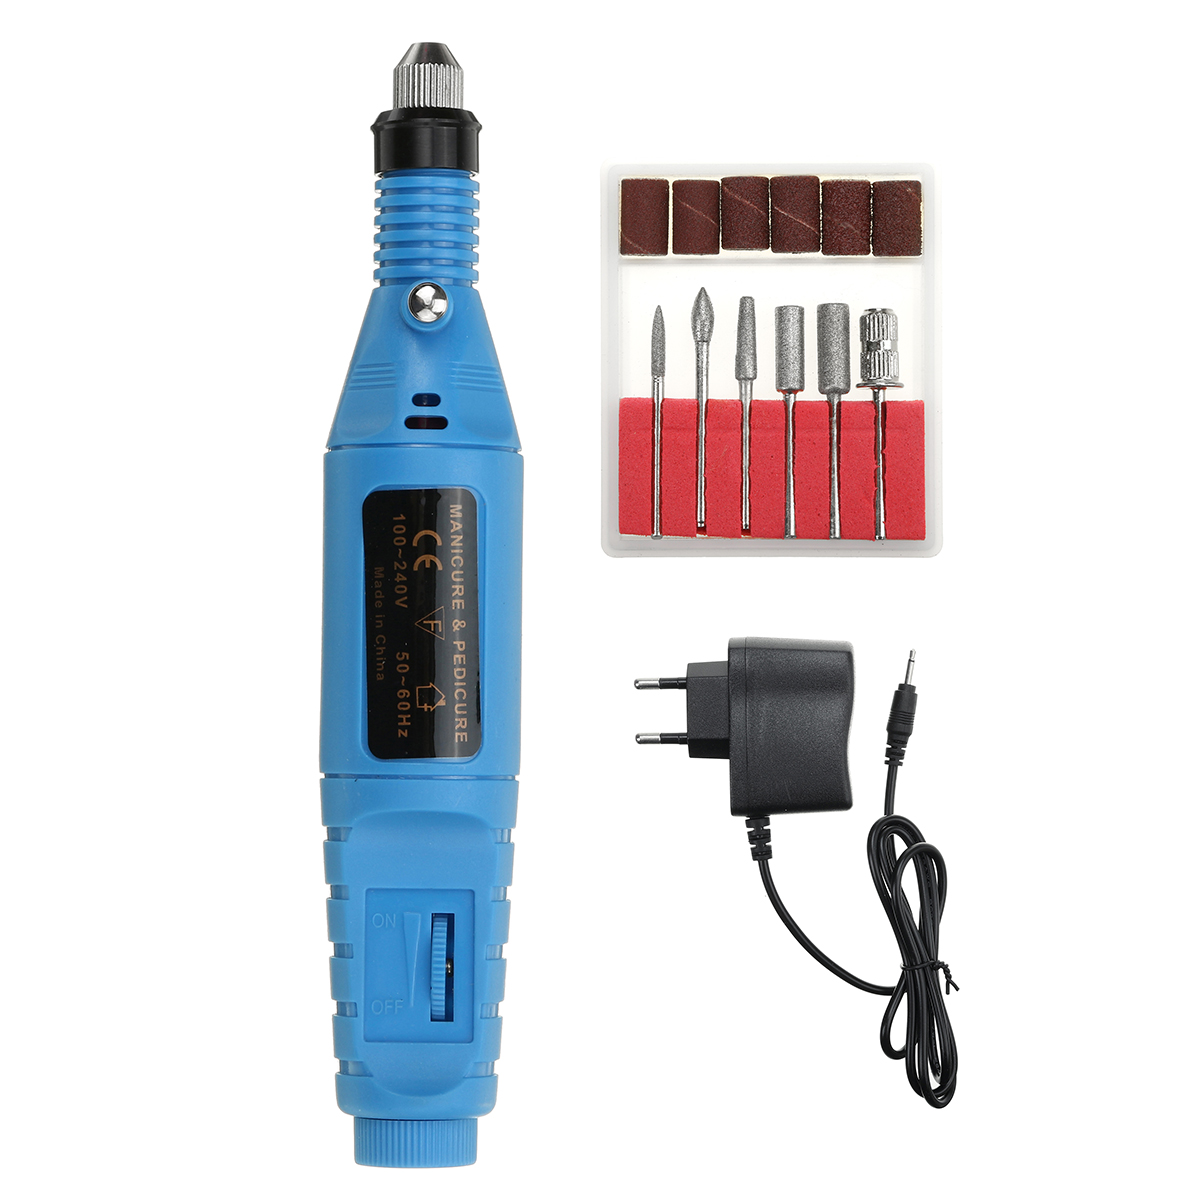 Adjustable-Electric-Drill-Grinder-Engraver-Pen-Mini-Drill-Electric-Rotary-Tool-Grinding-Machine-1818672-1